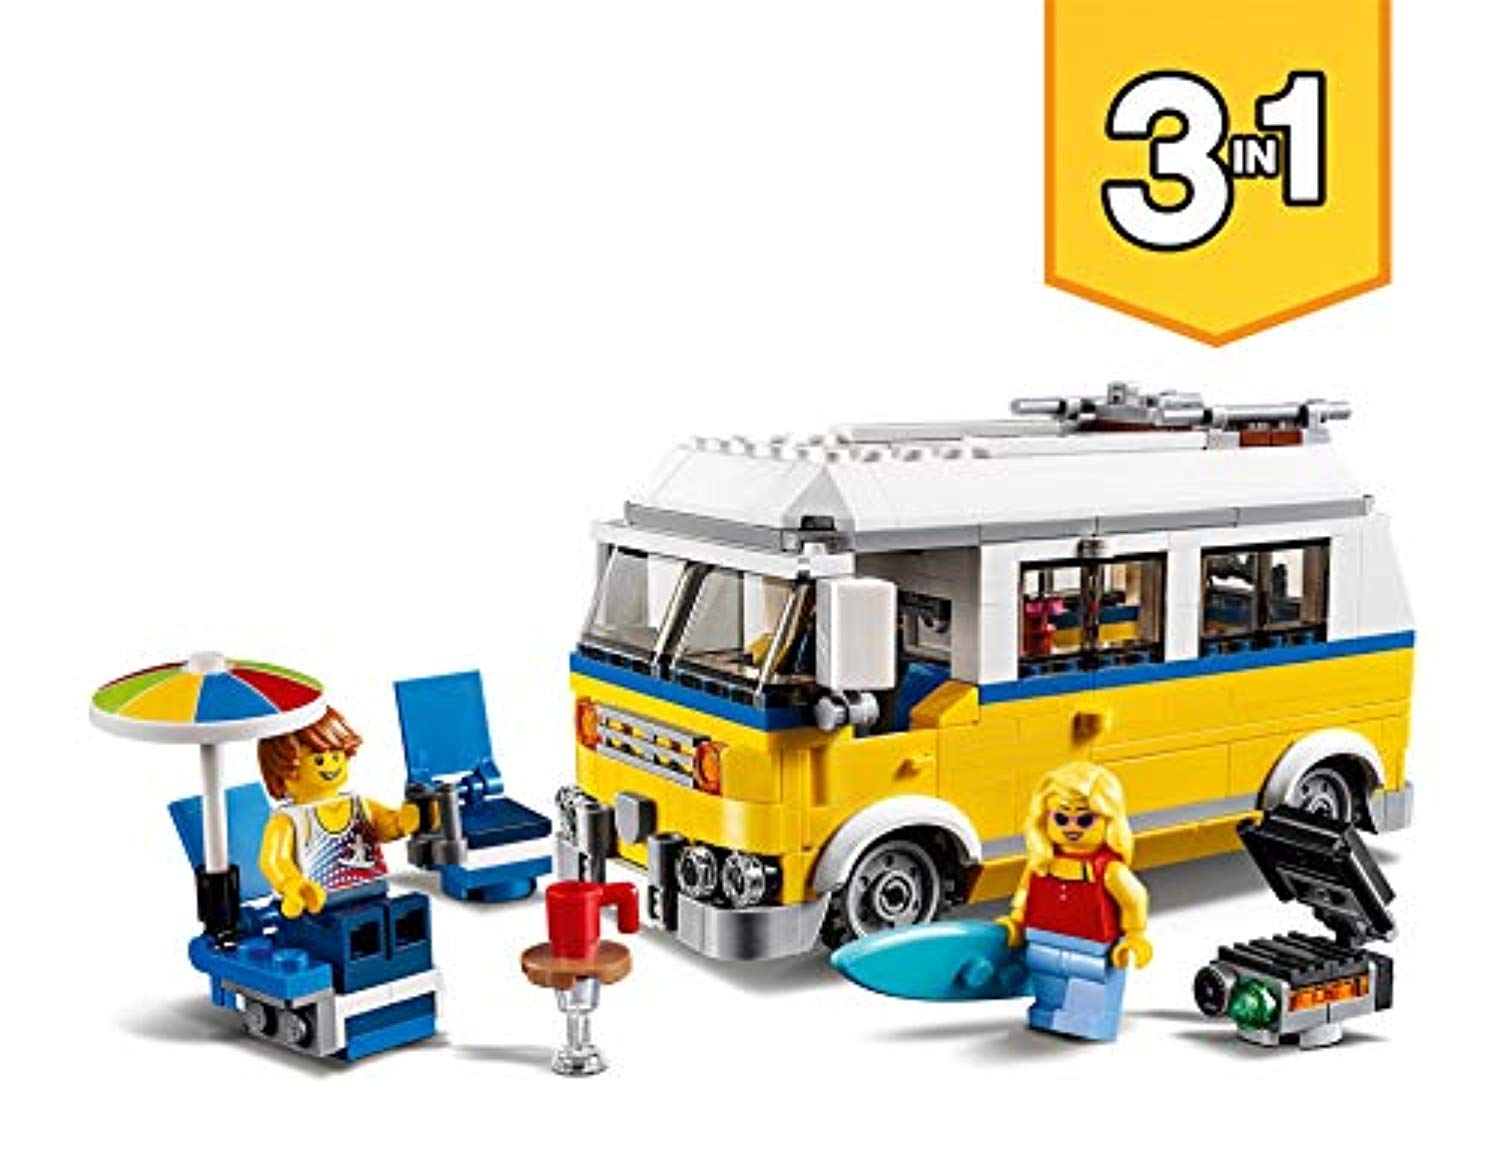 LEGO 31079 Creator 3in1 Sunshine Surfer Van Lifeguard Tower and Beach Buggy Model Building Set with Quad Bike, Toys for Kids 8 - 12 Years Old - Offer Games